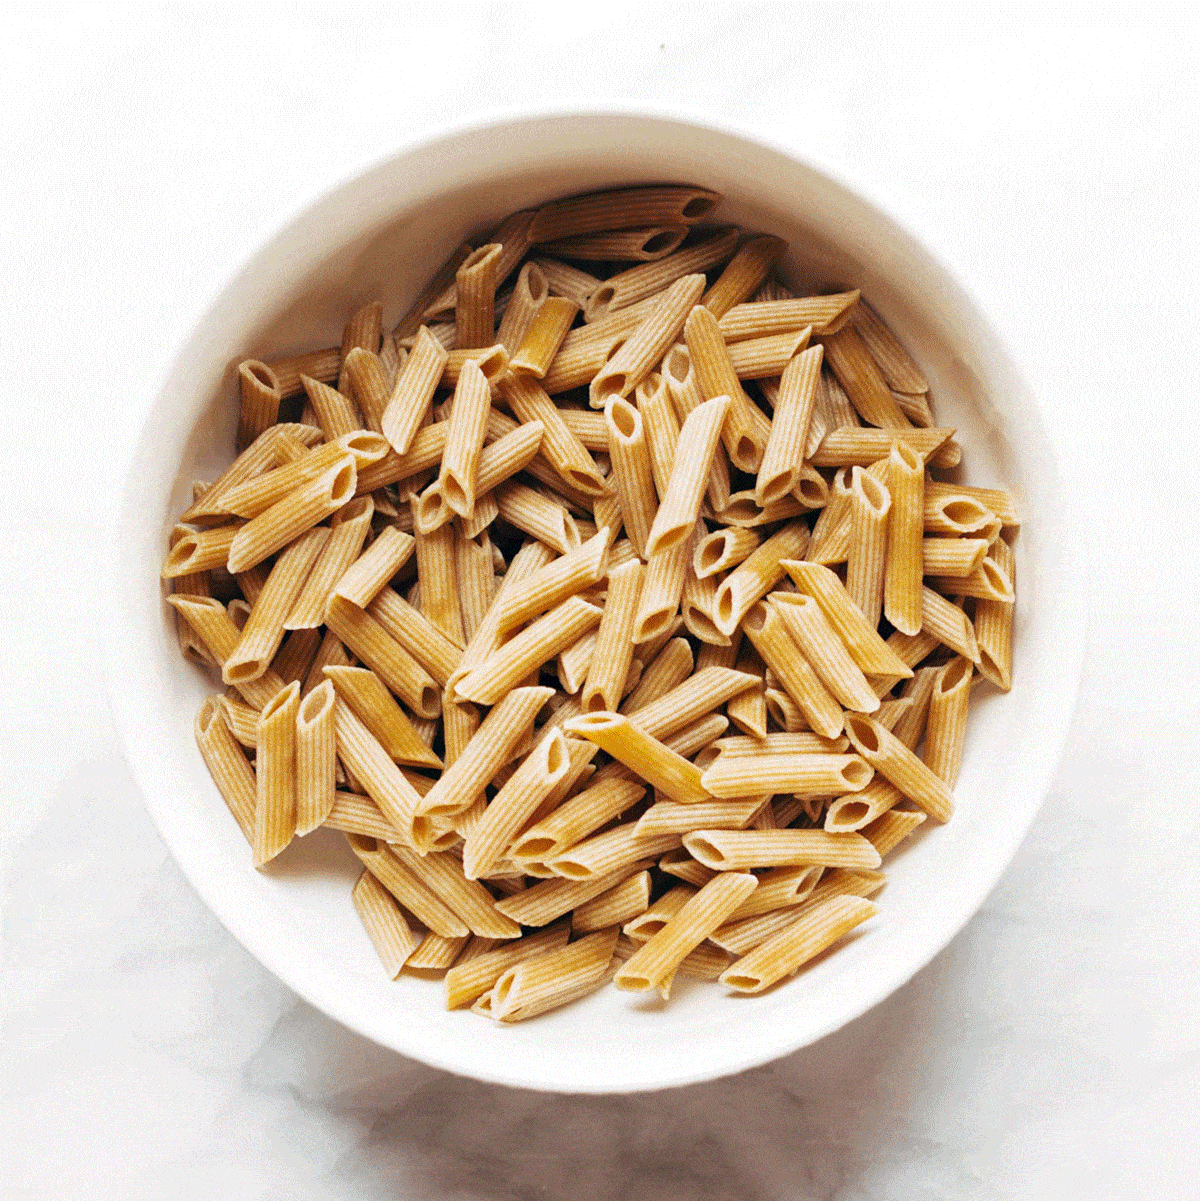 Dry penne noodles in a bowl.